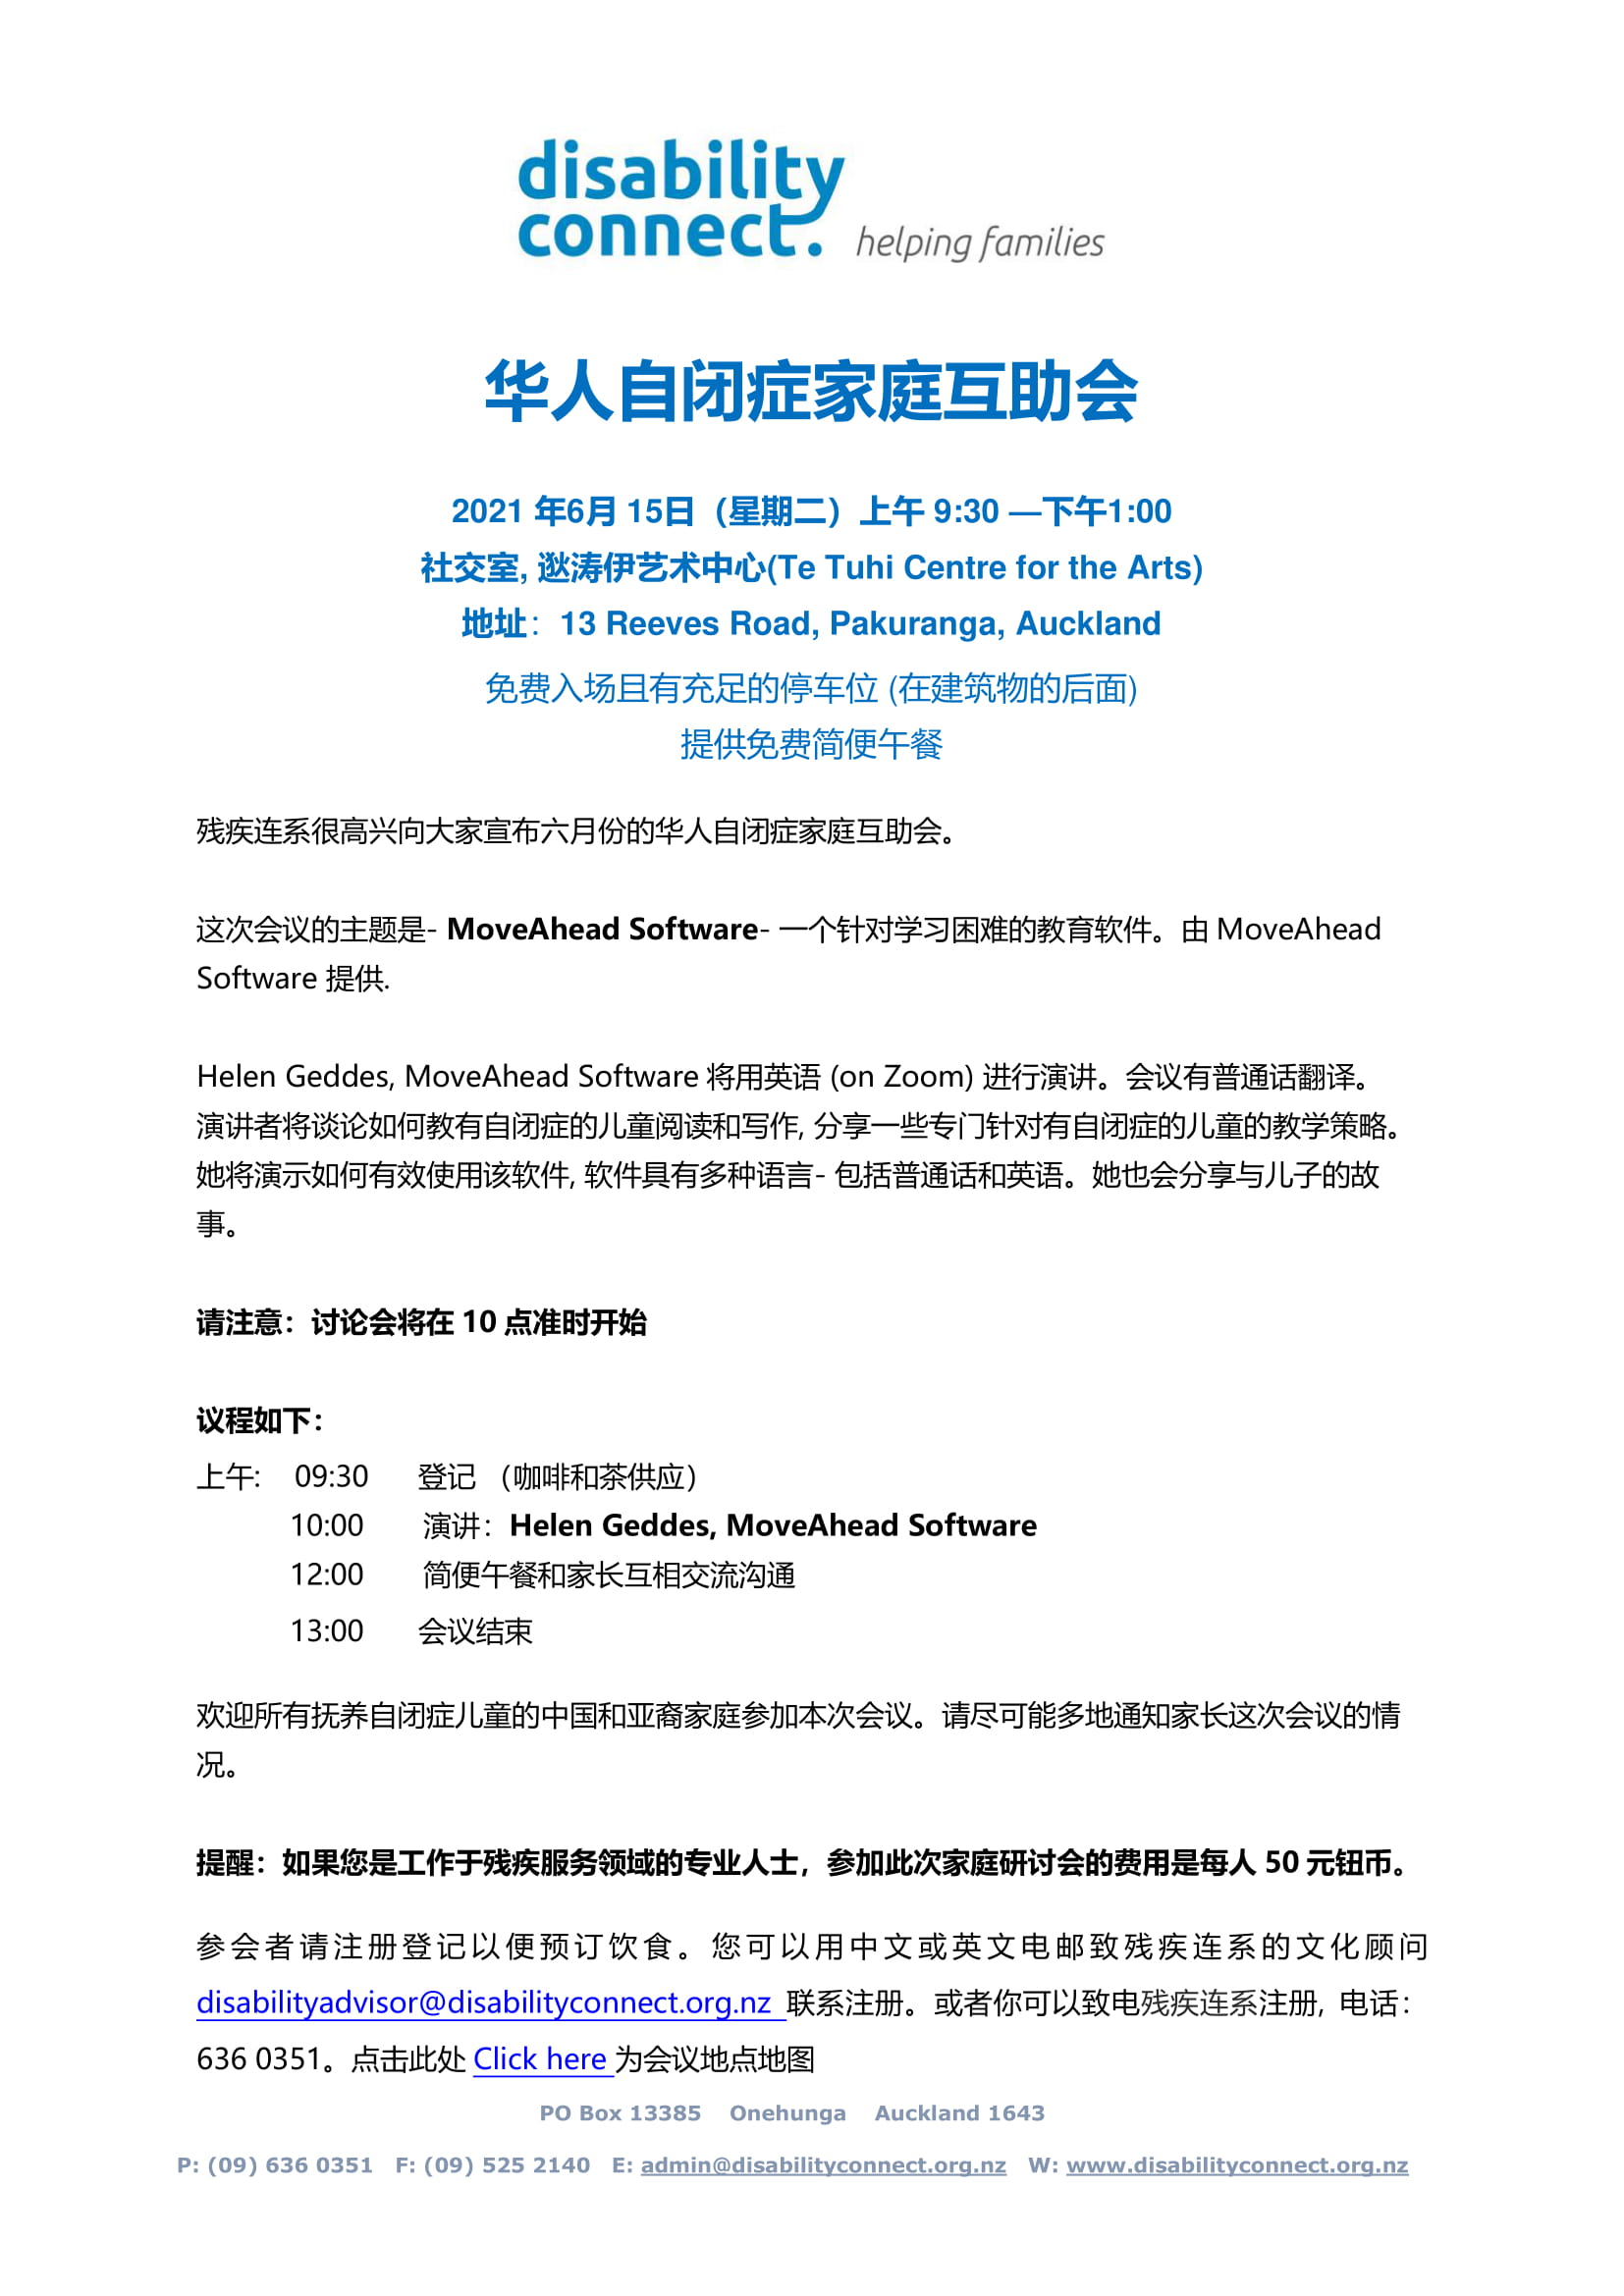 Sth Akl Chinese Autism Support Group Chinese 15 june 2021-1.jpg